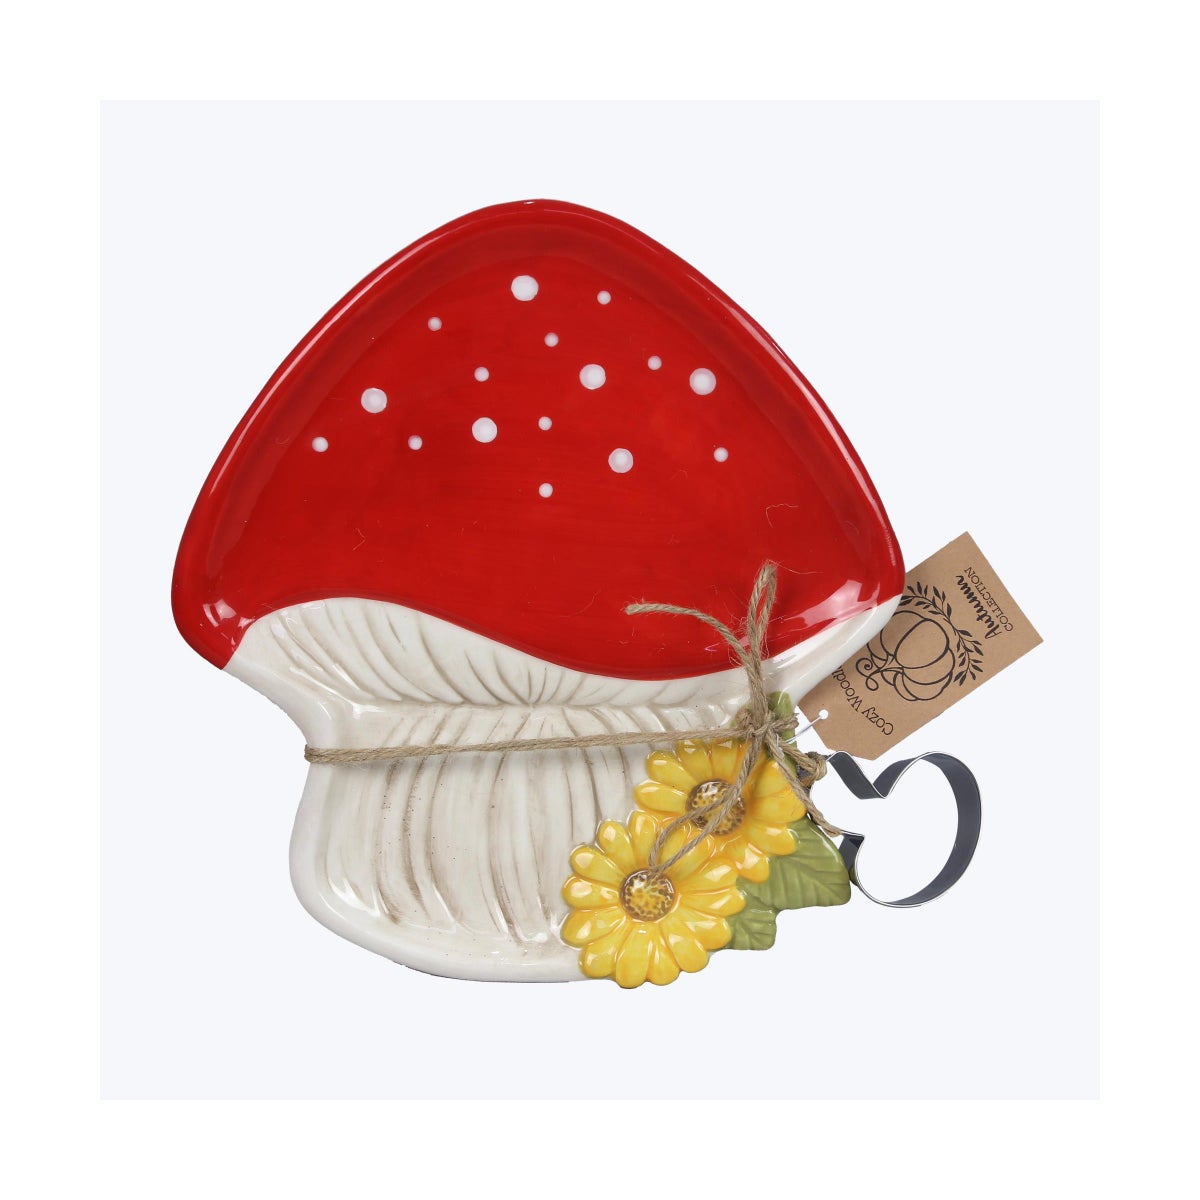 Ceramic Cottage Core Mushroom Cookie Plate with Metal Cookie Cutter